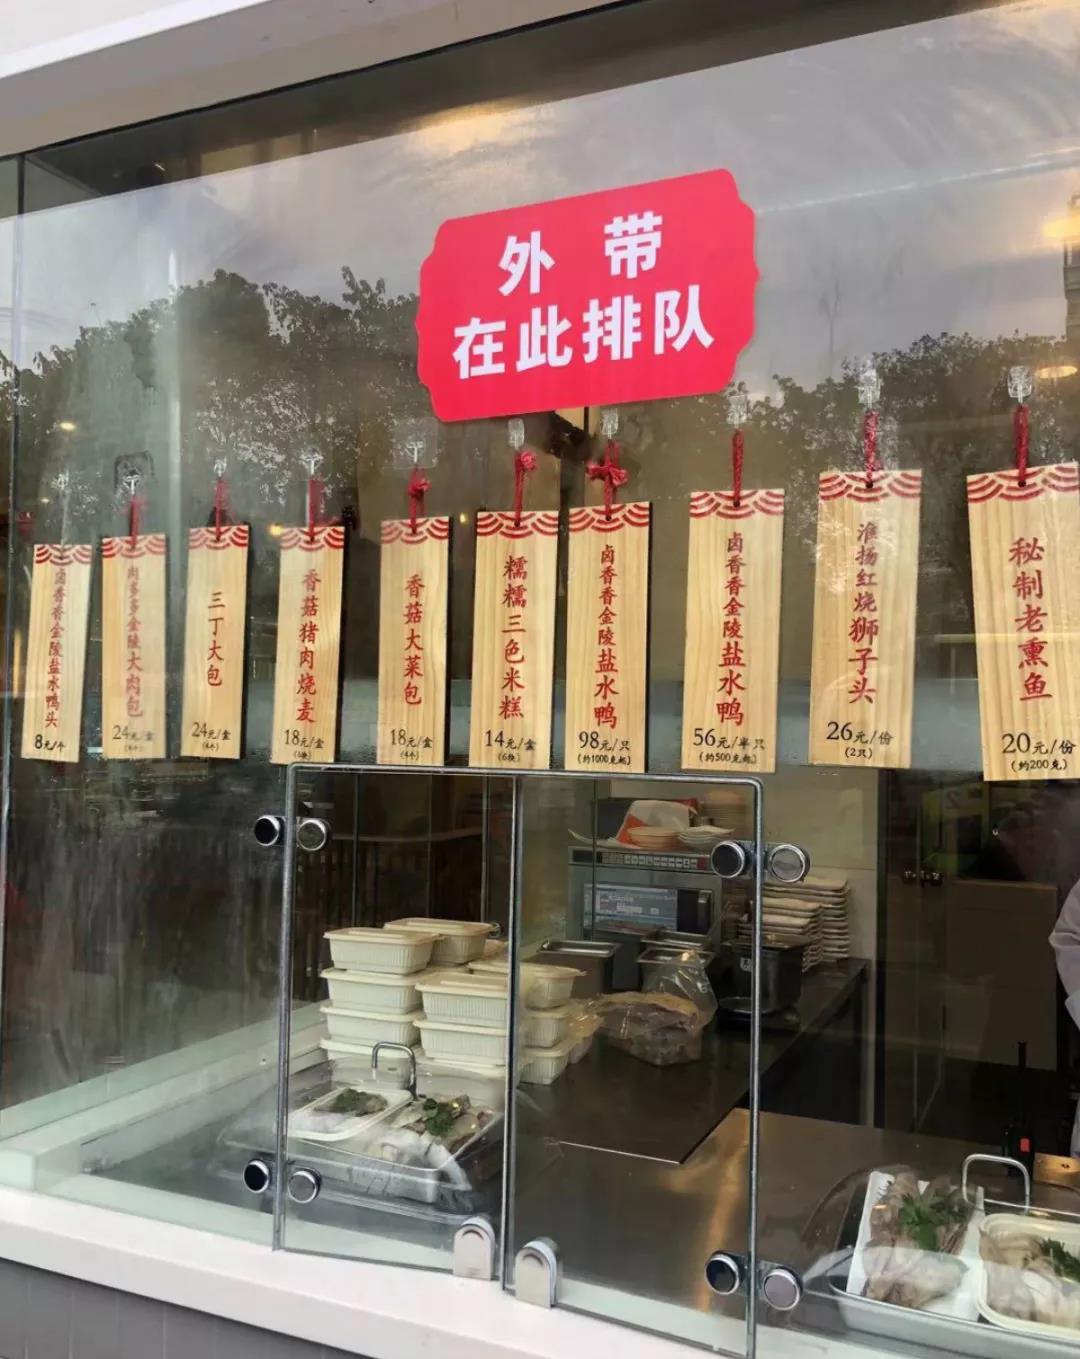 KFC "brothers" sell steamed buns, can Yum China fi